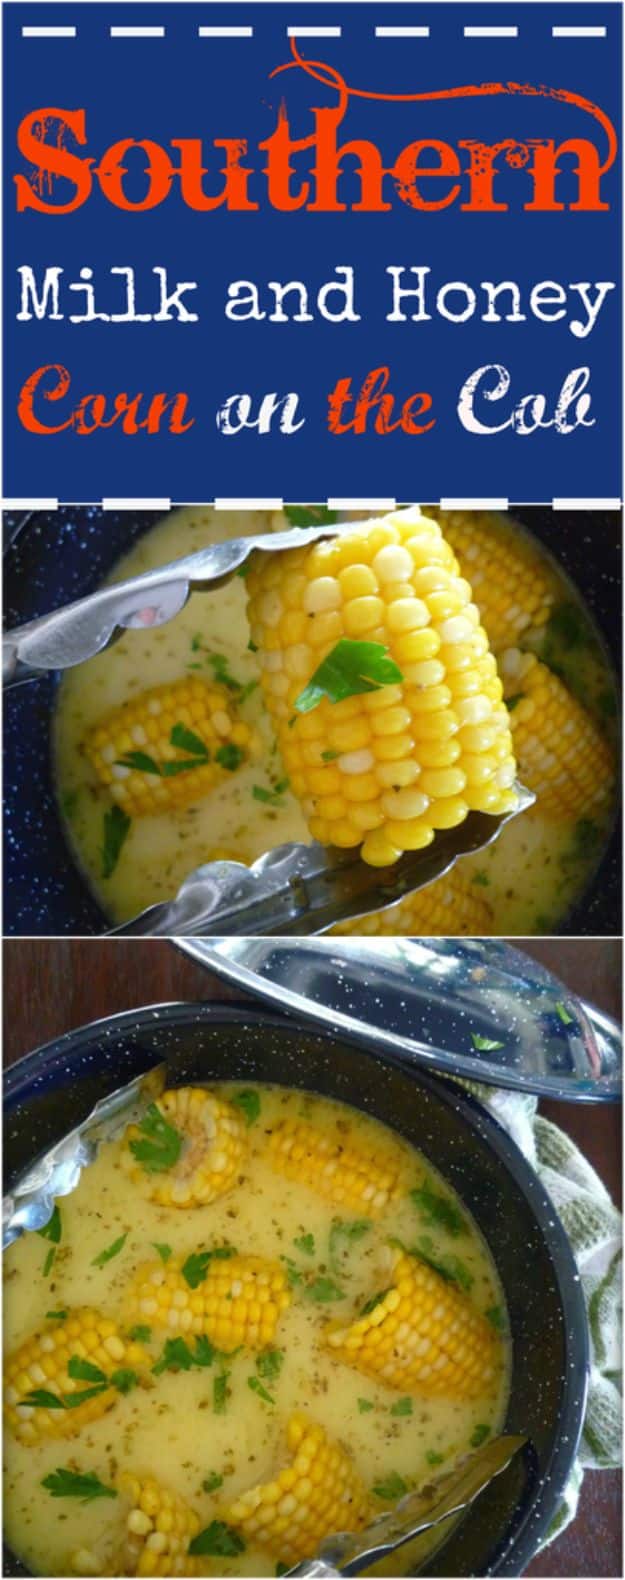 Best Country Cooking Recipes - Southern Milk And Honey Corn On The Cob - Easy Recipes for Country Food Like Chicken Fried Steak, Fried Green Tomatoes, Southern Gravy, Breads and Biscuits, Casseroles and More - Breakfast, Lunch and Dinner Recipe Ideas for Families and Feeding A Crowd - Step by Step Instructions for Making Homestyle Dips, Snacks, Desserts #recipes